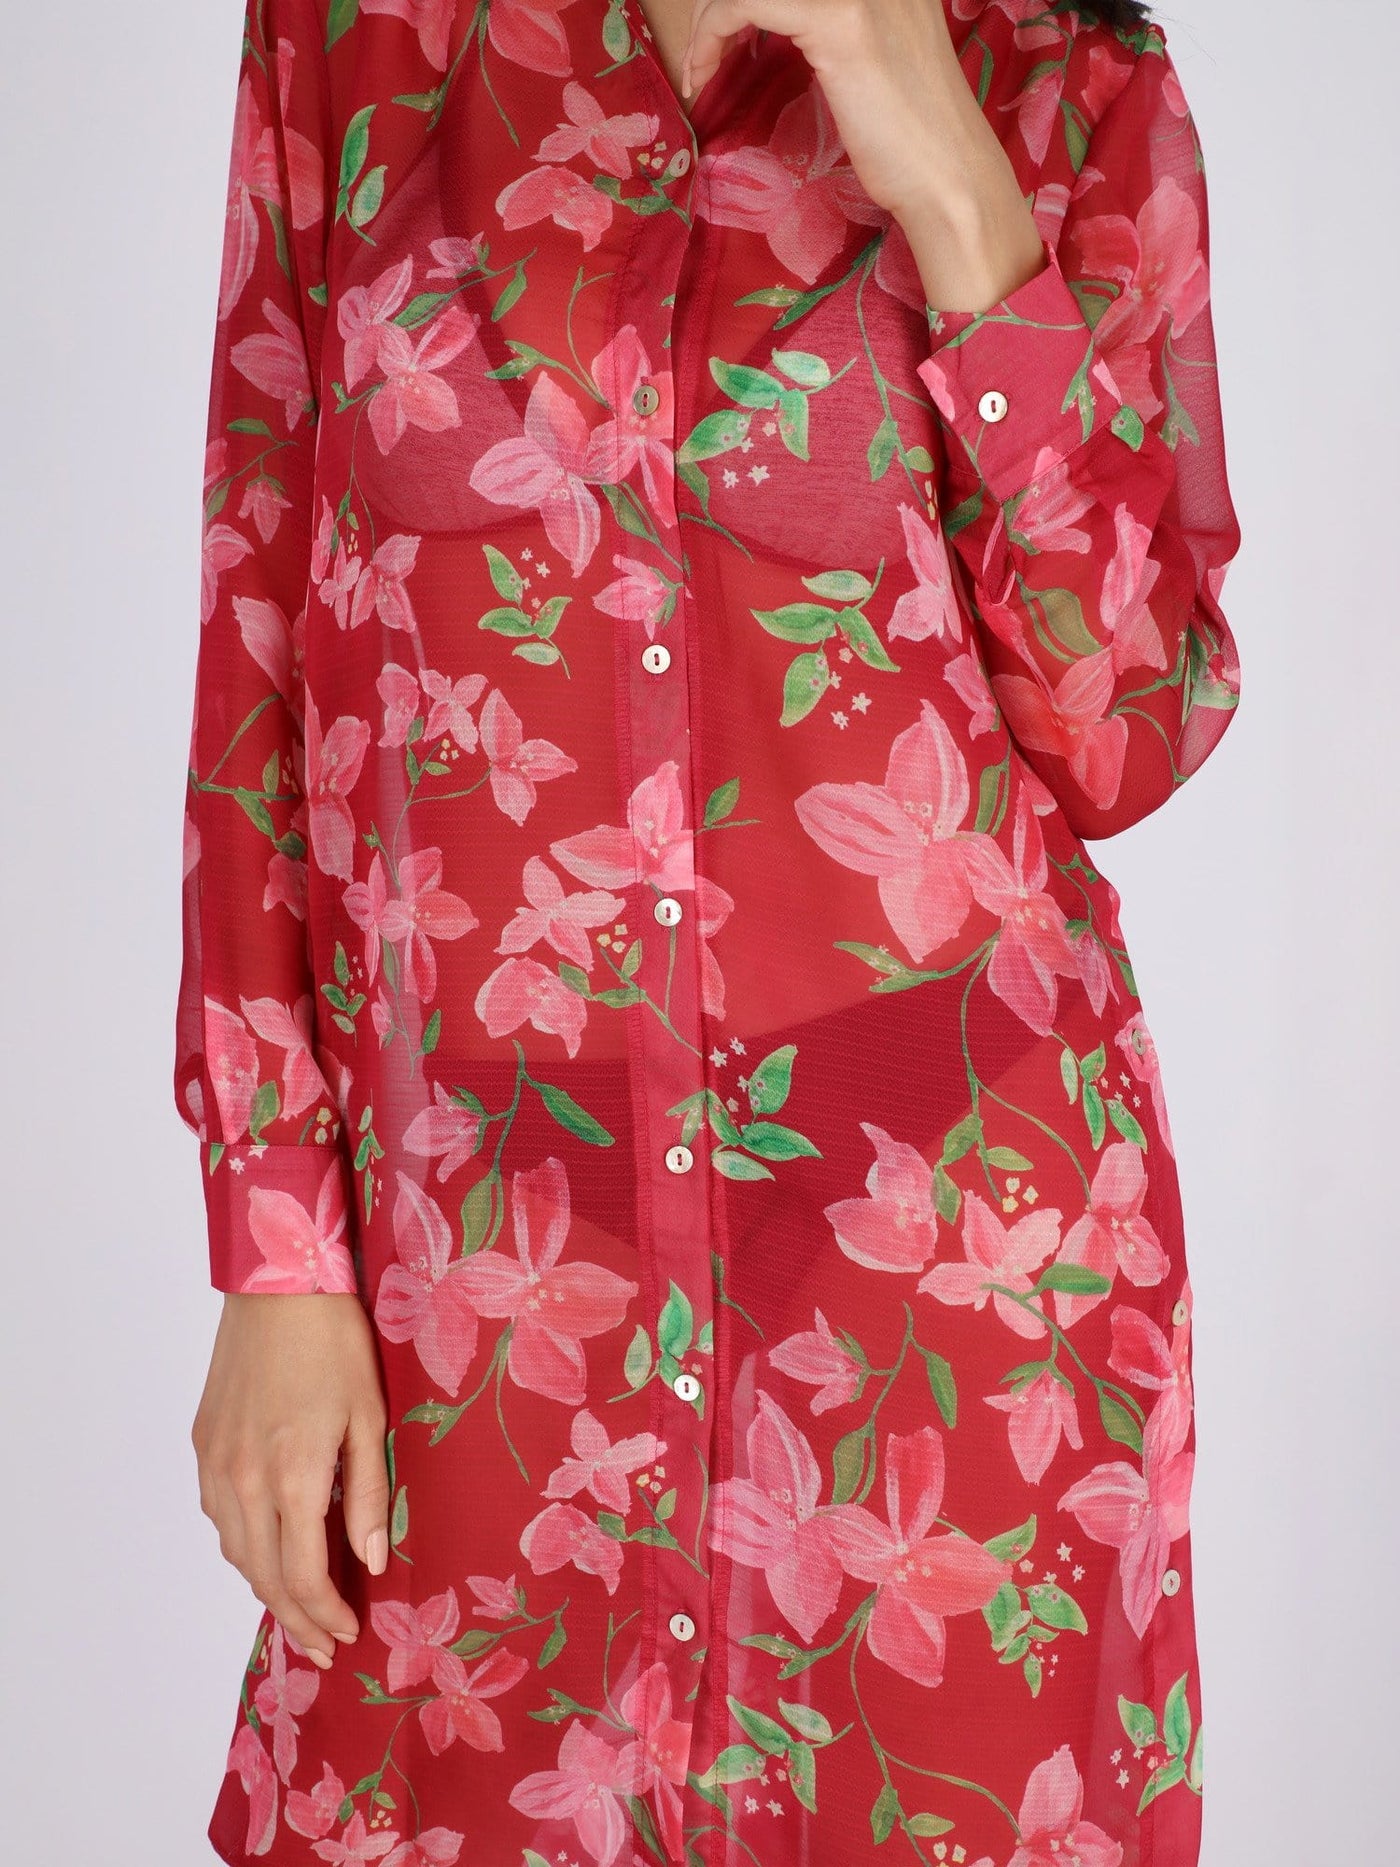 OR Swimwear Fandango Pink / S Button Down Floral Cover Up